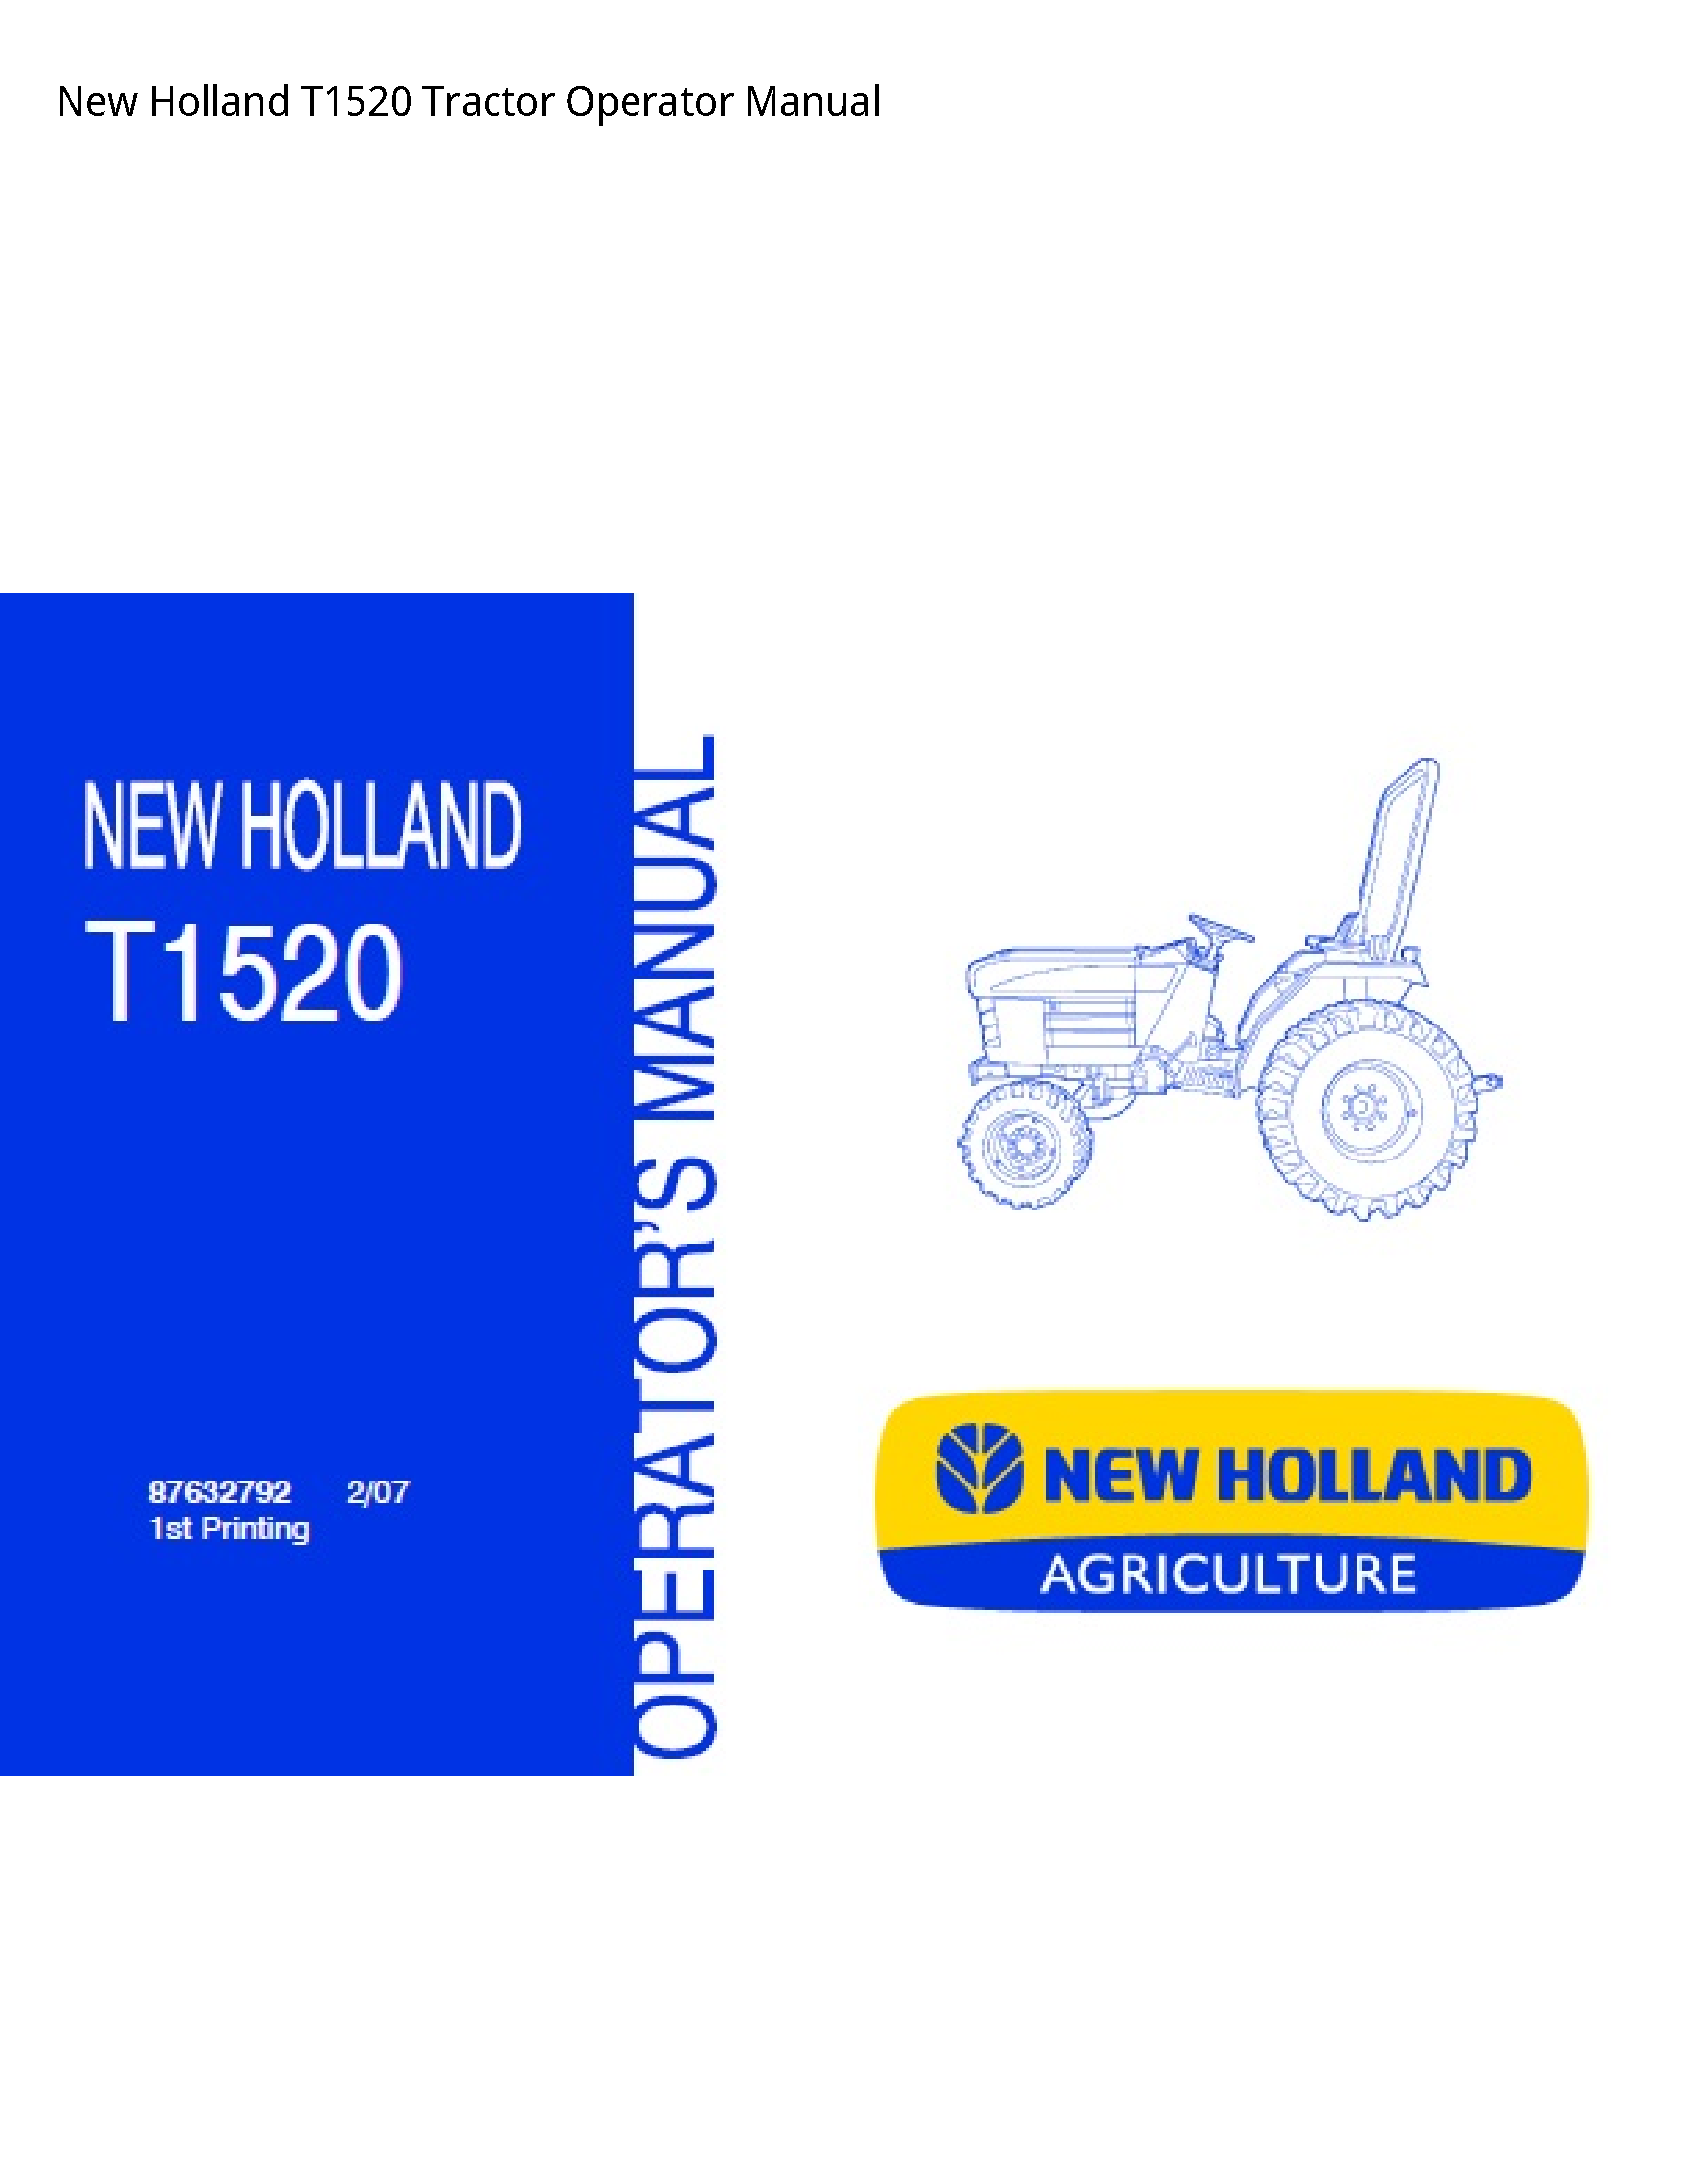 New Holland T1520 Tractor Operator manual